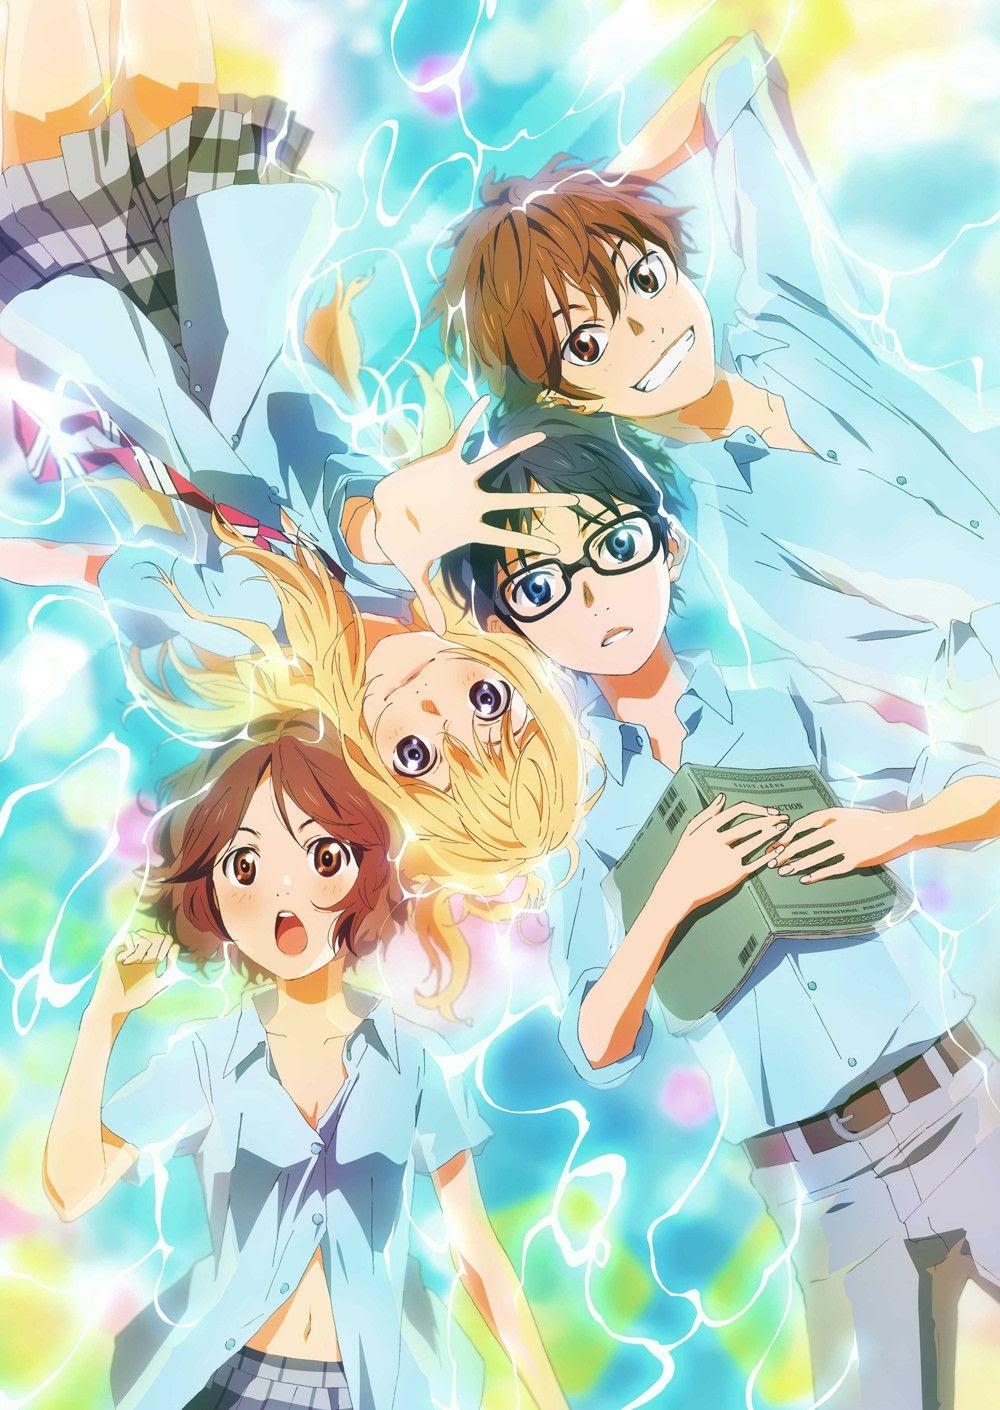 Anime Review Desu: Your Lie in April – The Flame